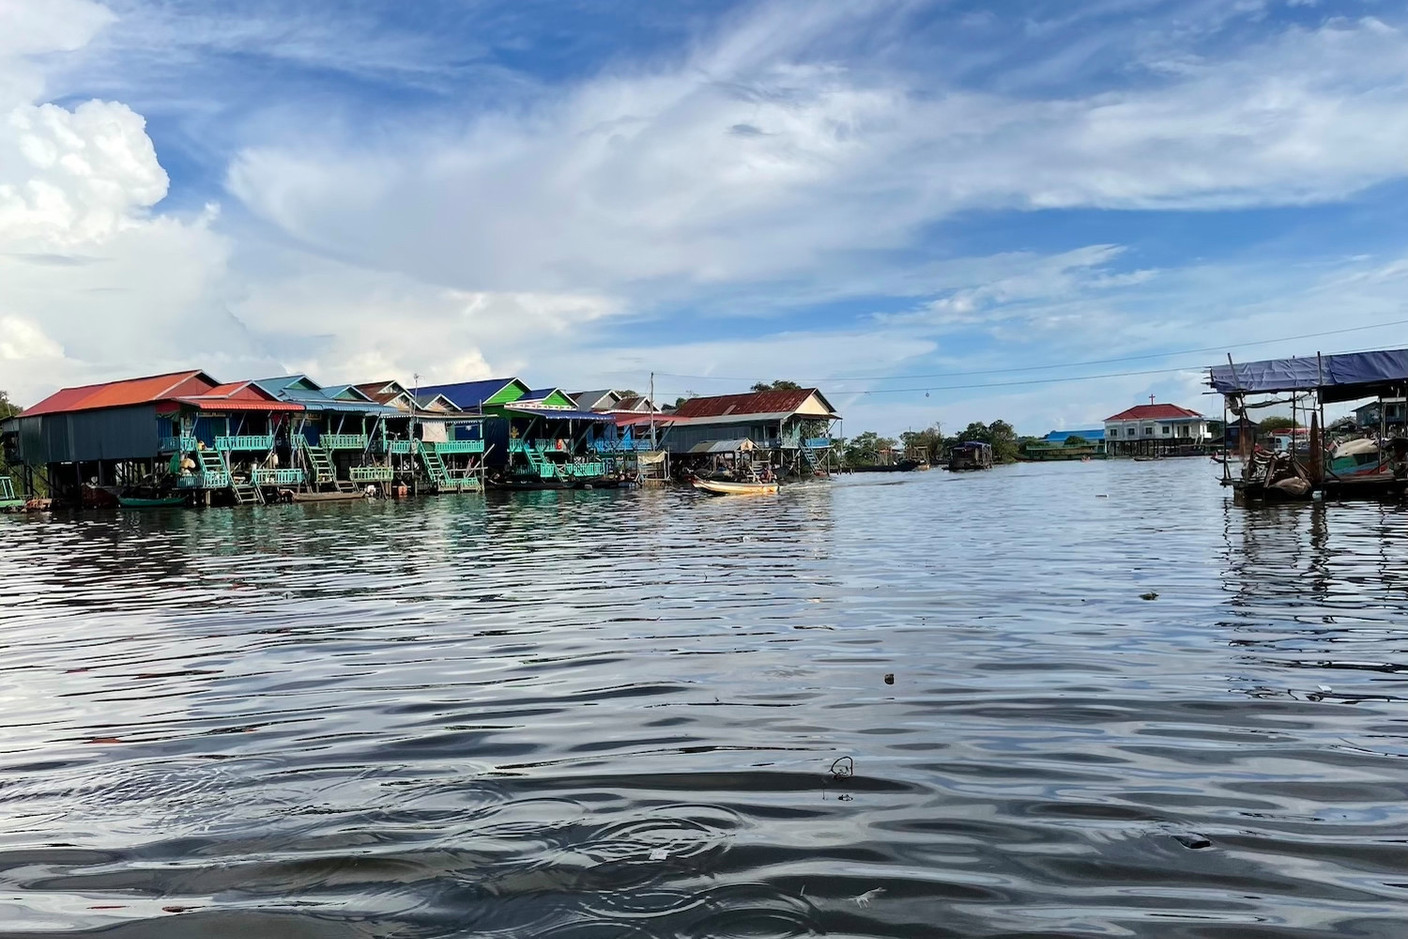 The Tonlé Sap lake and the Kampong Phluk floating village. The lake is the largest freshwater lake in Southeast Asia, which reverses its flow at the end of the rainy season to begin replenishing the Mekong river. Photo: Cordula Schnuer